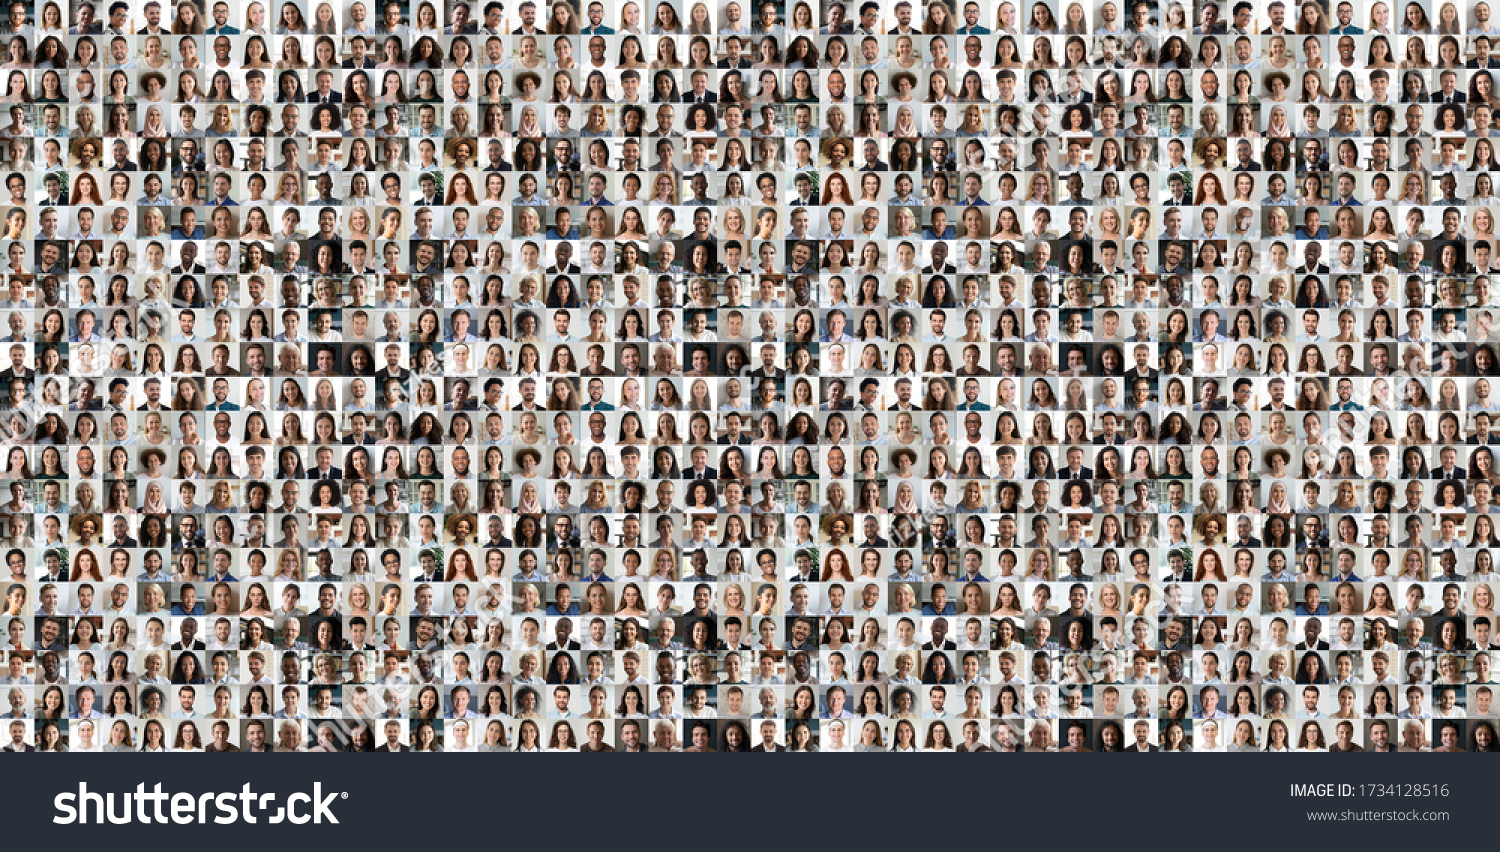 Hundreds of multiracial people crowd portraits headshots collection, collage mosaic. Many lot of multicultural different male and female smiling faces looking at camera. Diversity and society concept. #1734128516